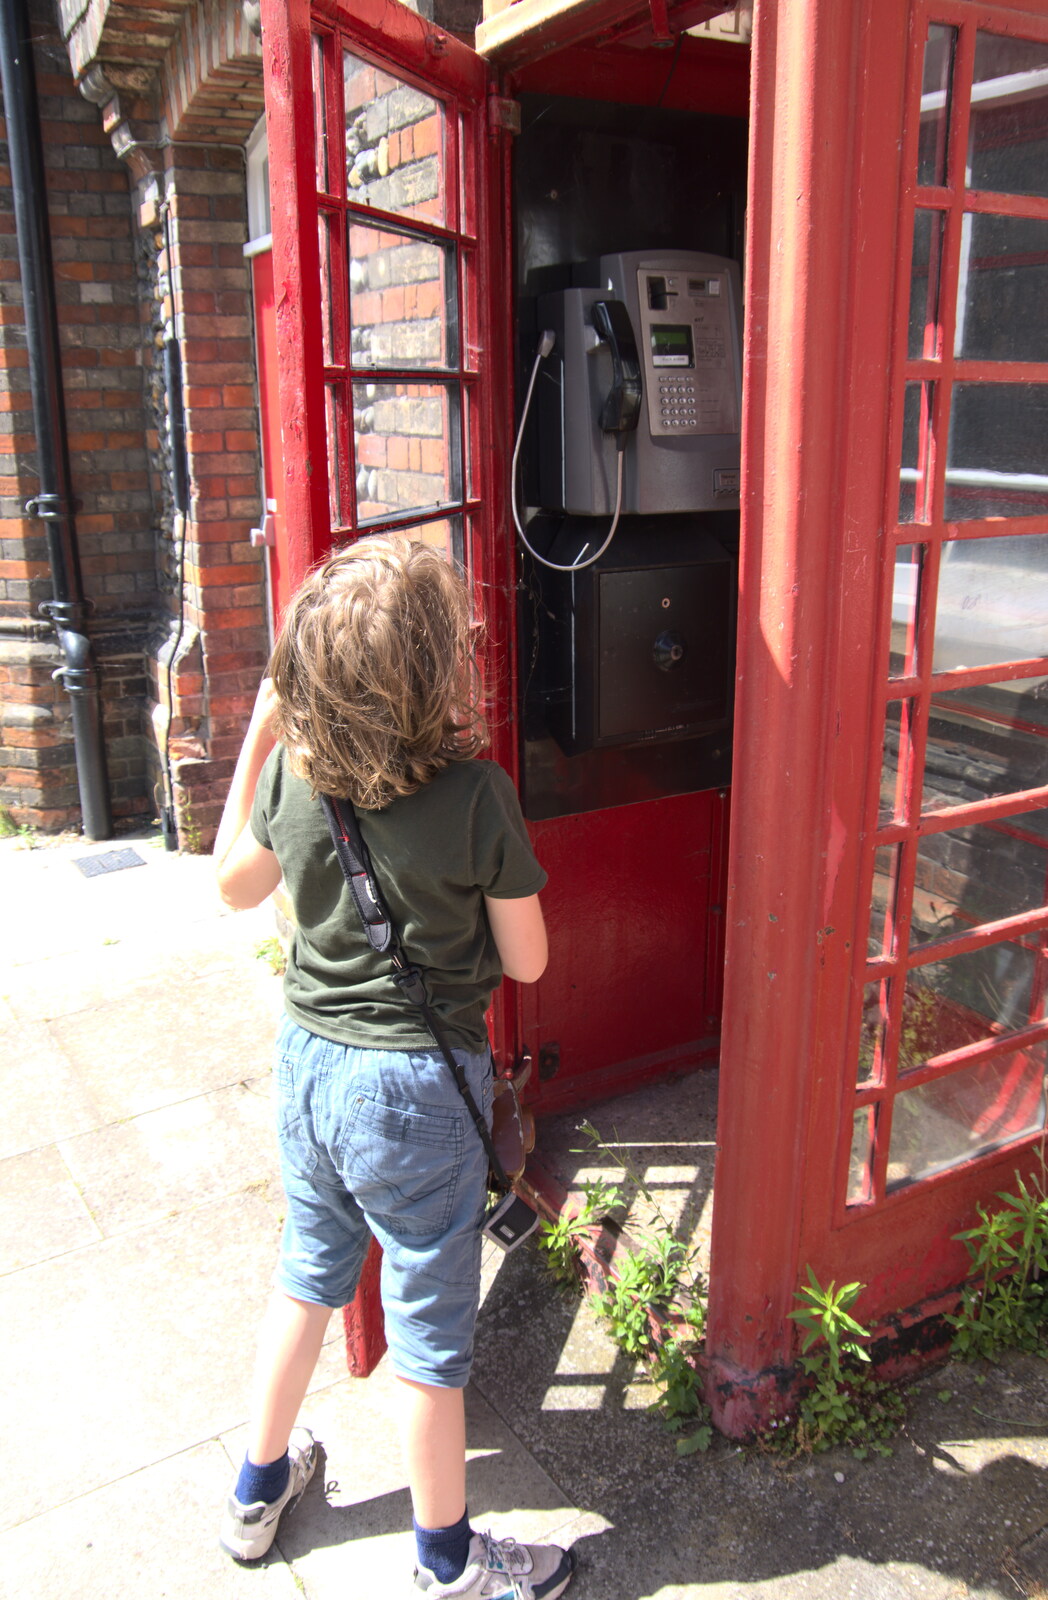 Fred checks out an old K6 phone box from A Walk Around Abbey Bridges, Eye, Suffolk - 5th July 2020